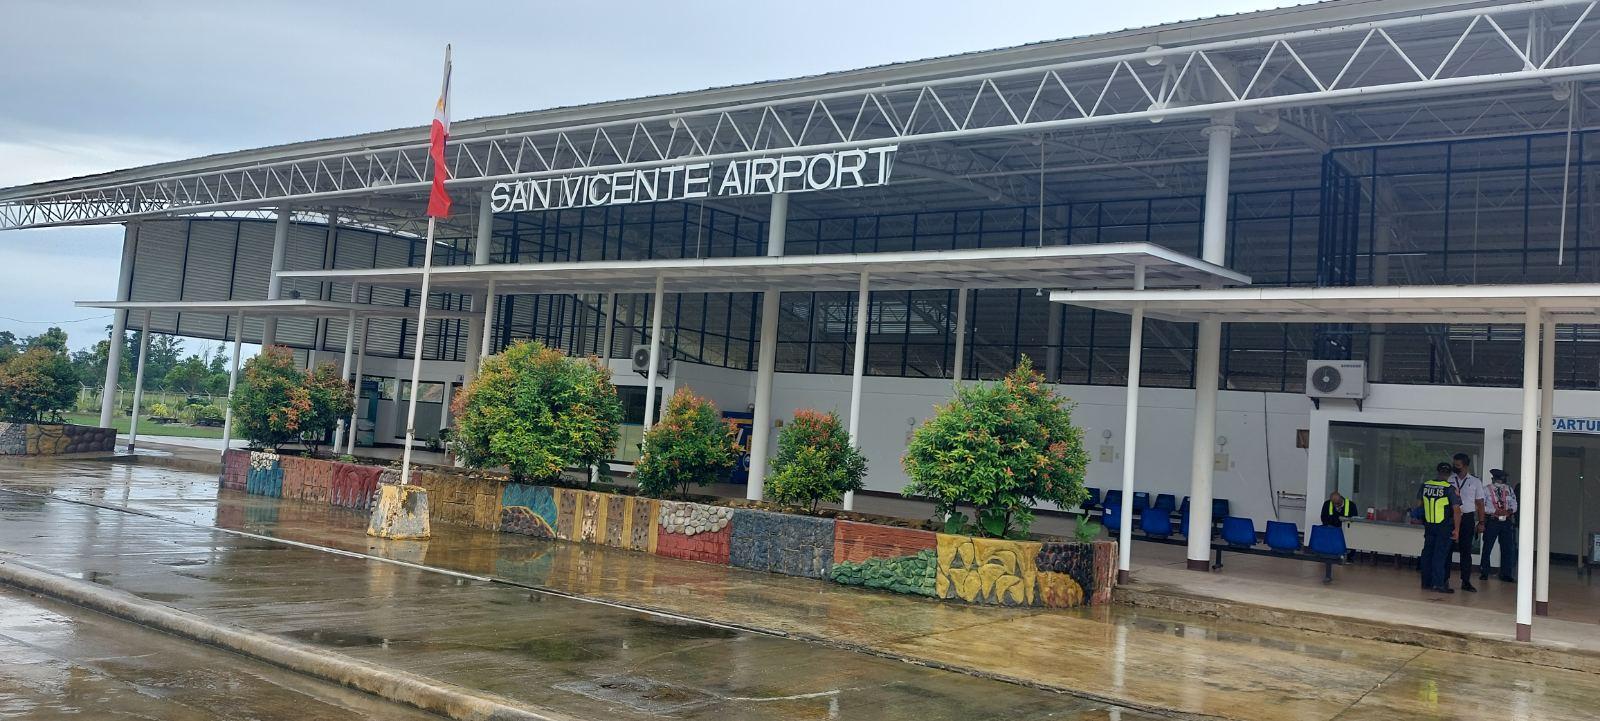 Most North Luzon airports back to normal operations –CAAP thumbnail